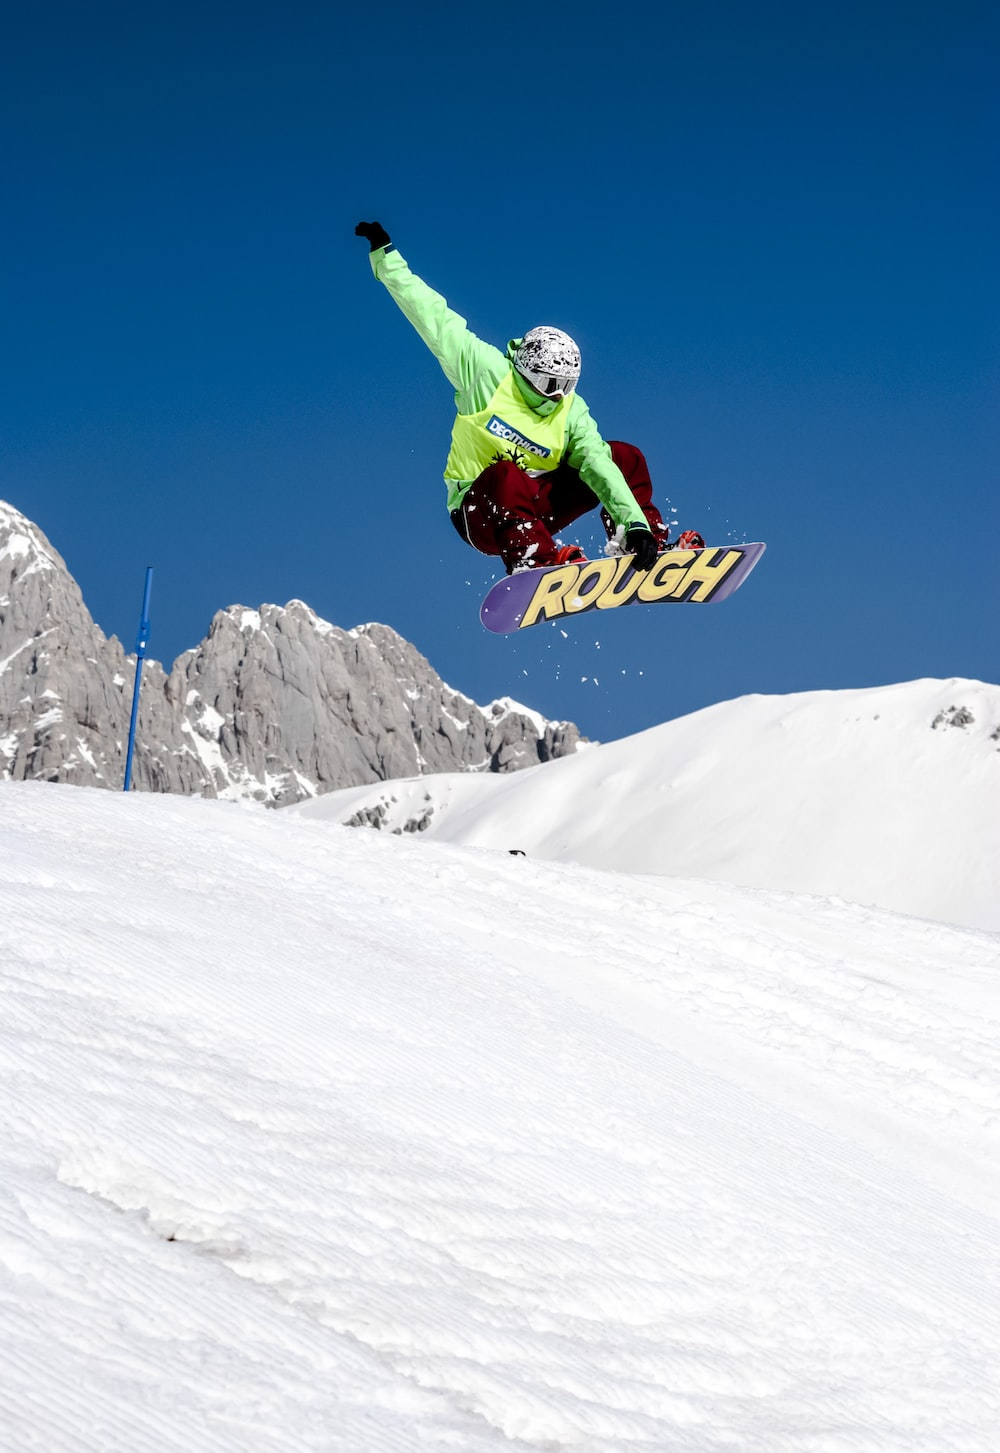 A person riding a snowboard in the air.